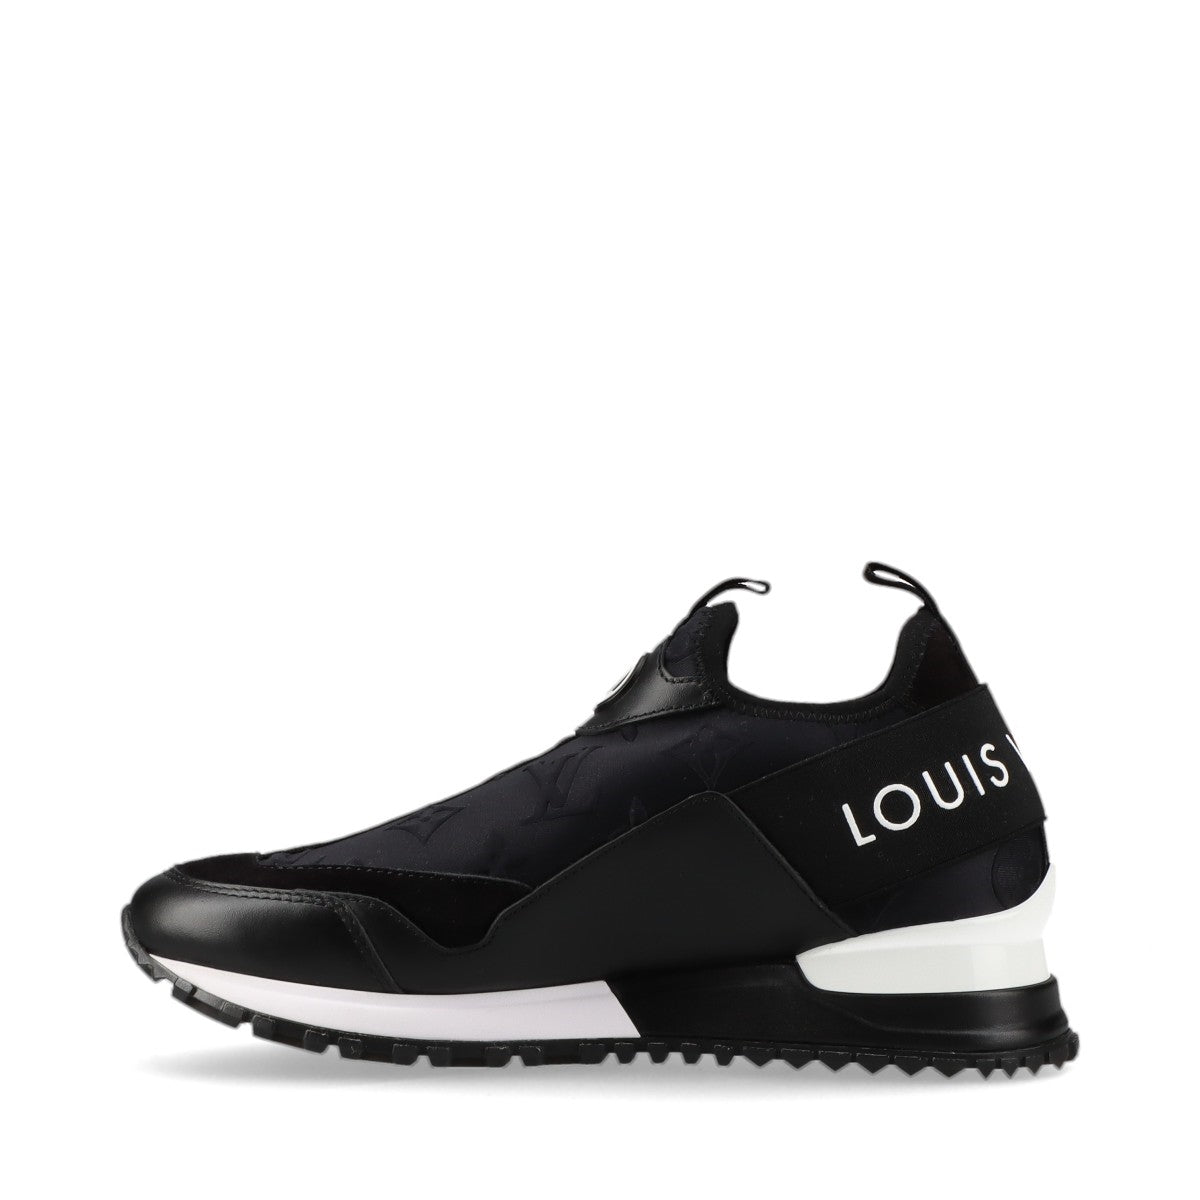 Louis Vuitton Runaway line Leather x fabric Sneakers 34.5 Ladies' Black × White Monogram LV Circle logo Box There is a storage bag